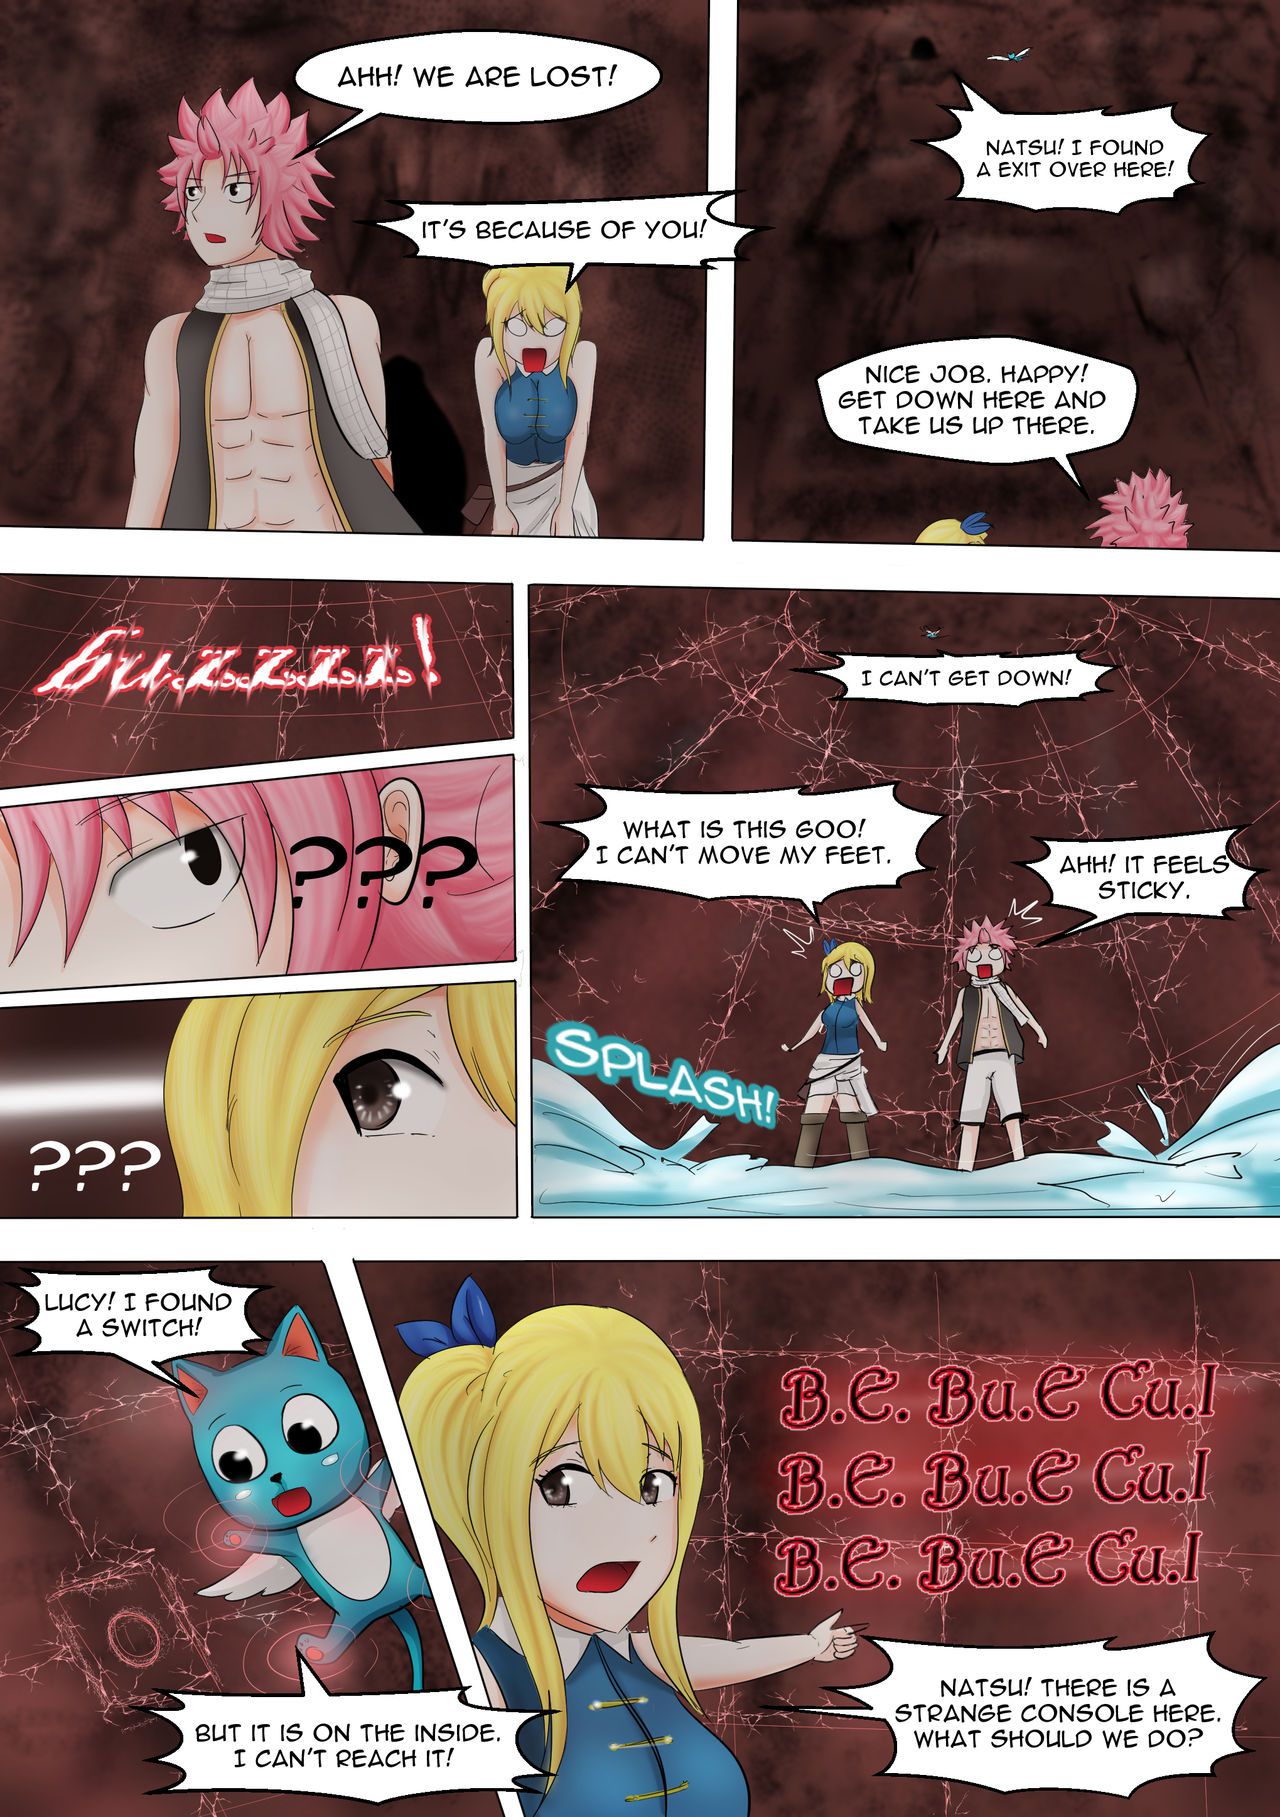 [EscapeFromExpansion] A Huger Game (Fairy Tail) [Ongoing] 14